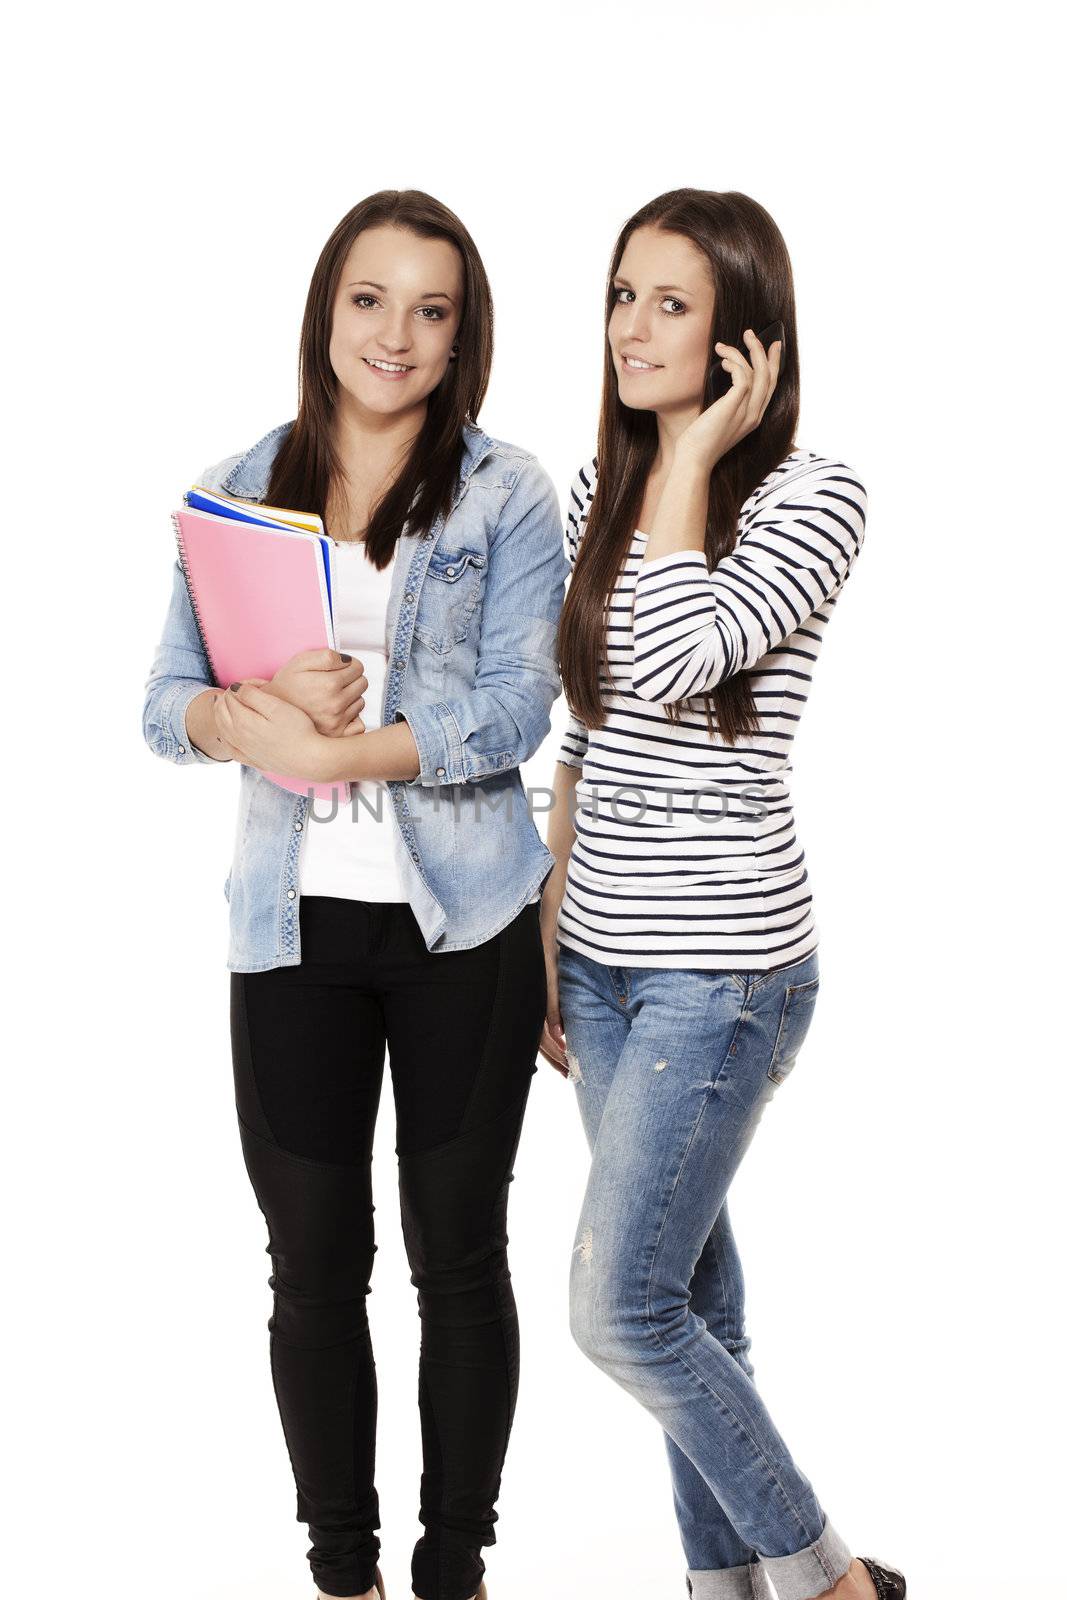 one student calling by phone near her friend with notepads on white background